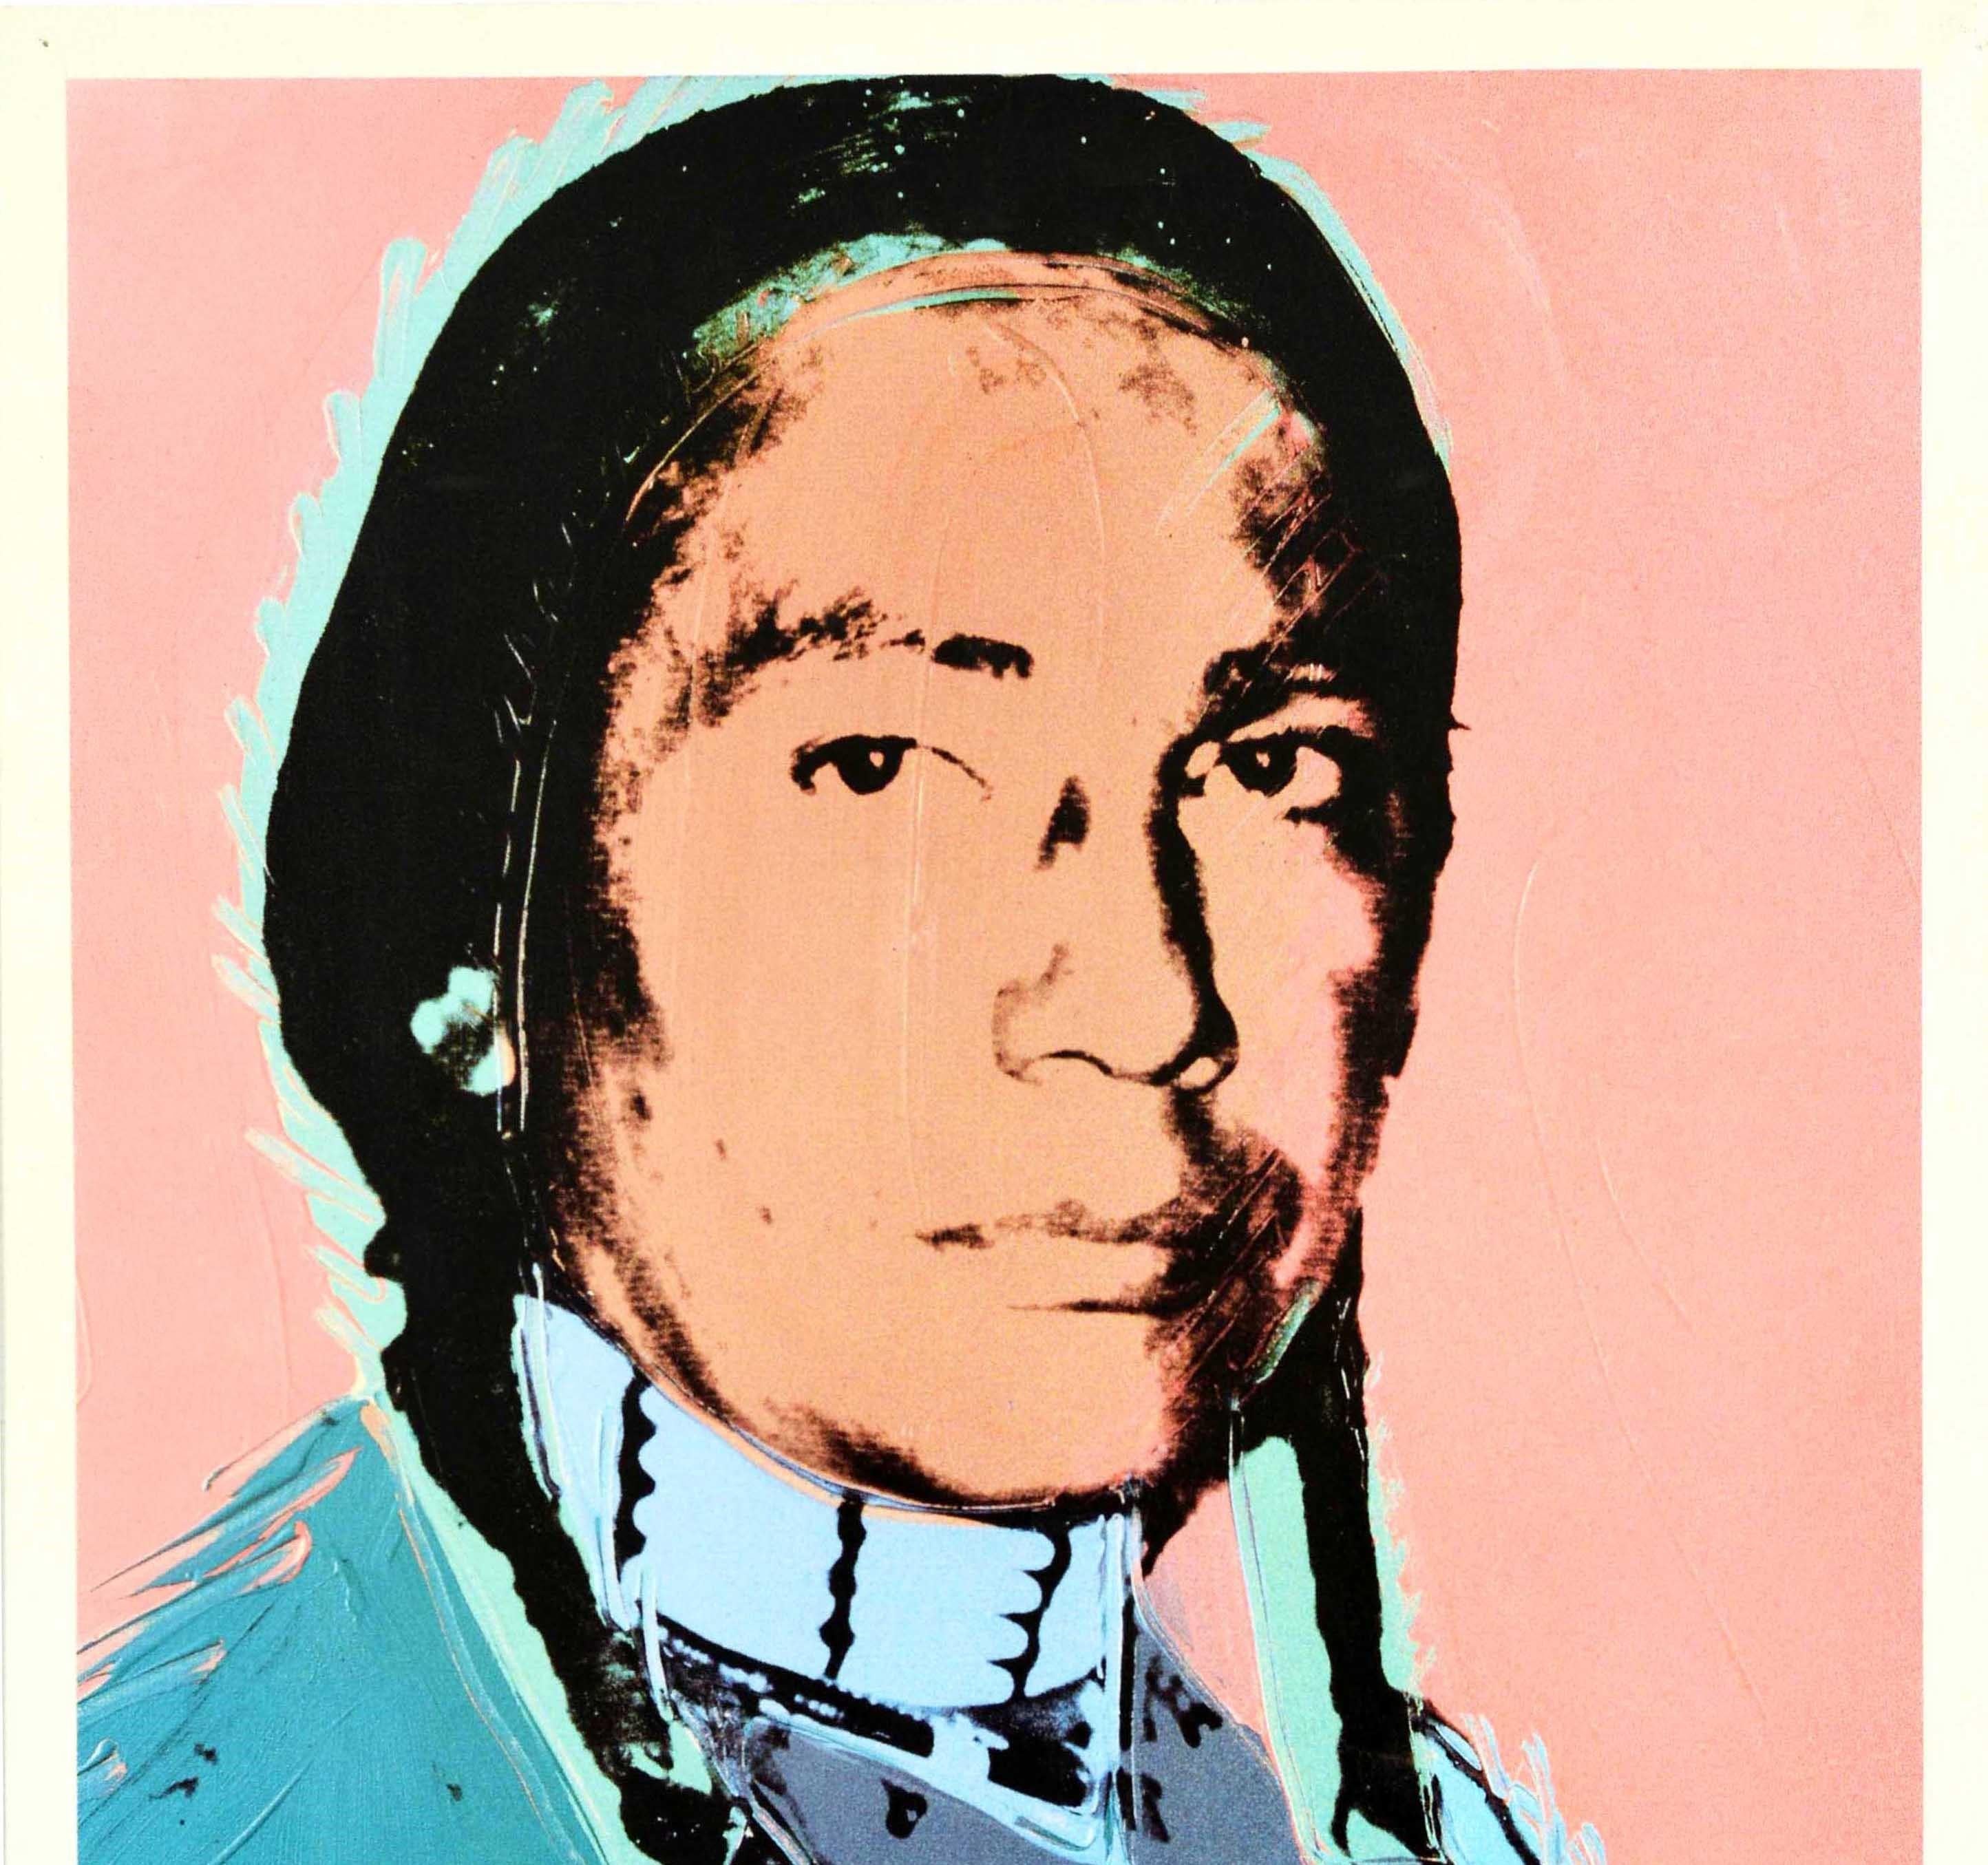 Original vintage advertising poster for The Art of The United States / L'art des Etats-Unis featuring a colourful Pop Art portrait design of the native American Russell Means in traditional dress by the notable artist Andy Warhol (1928-1987). The